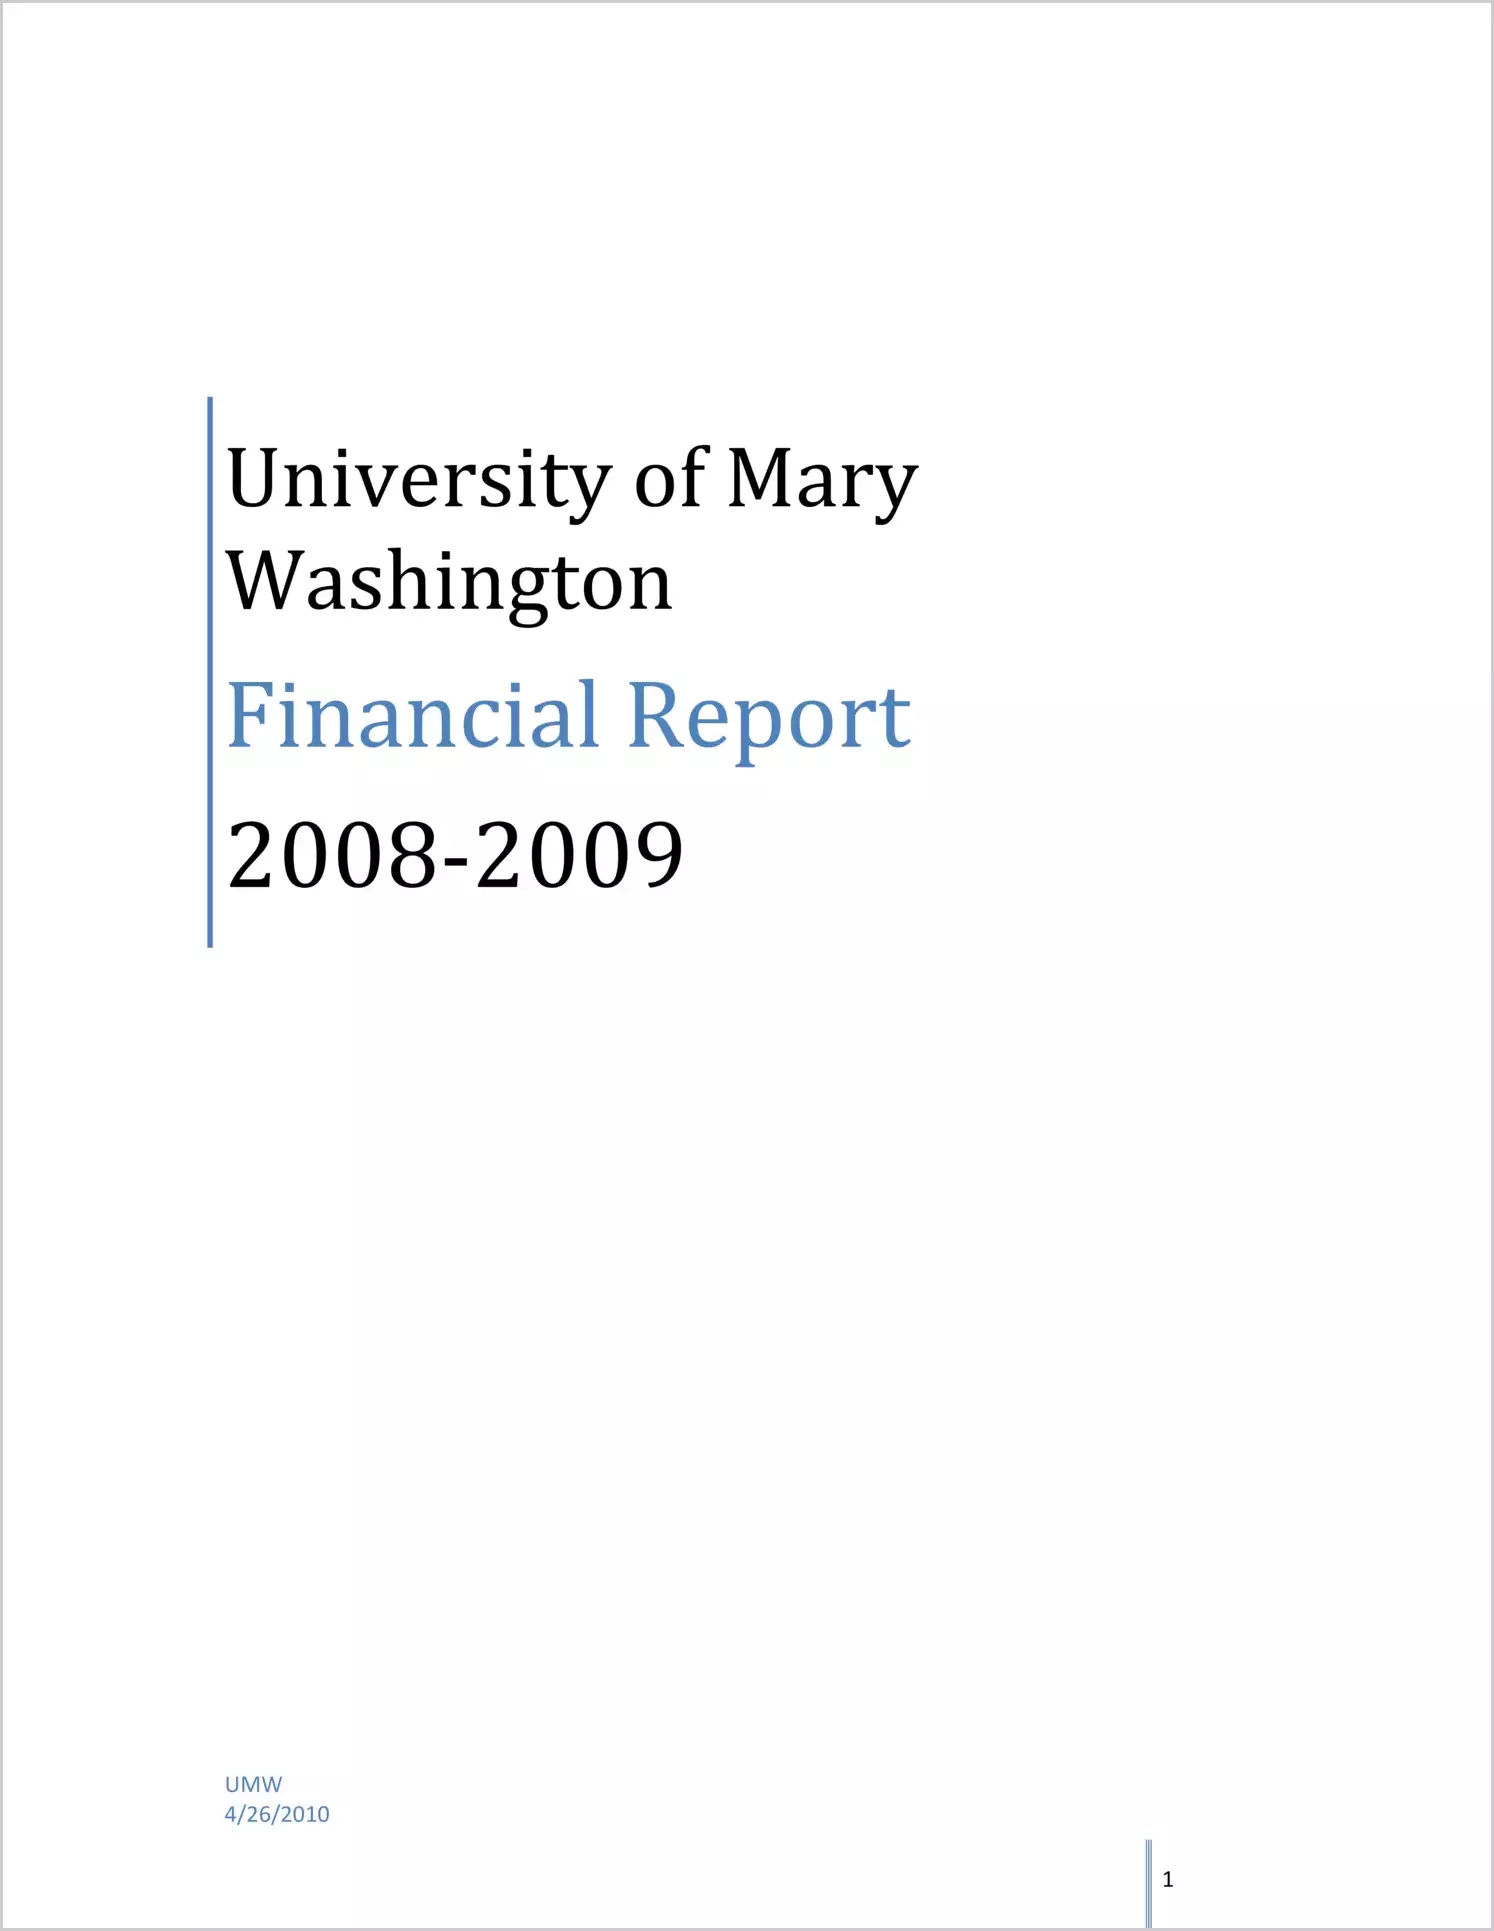 University of Mary Washington Financial Report for the year ended June 30, 2009